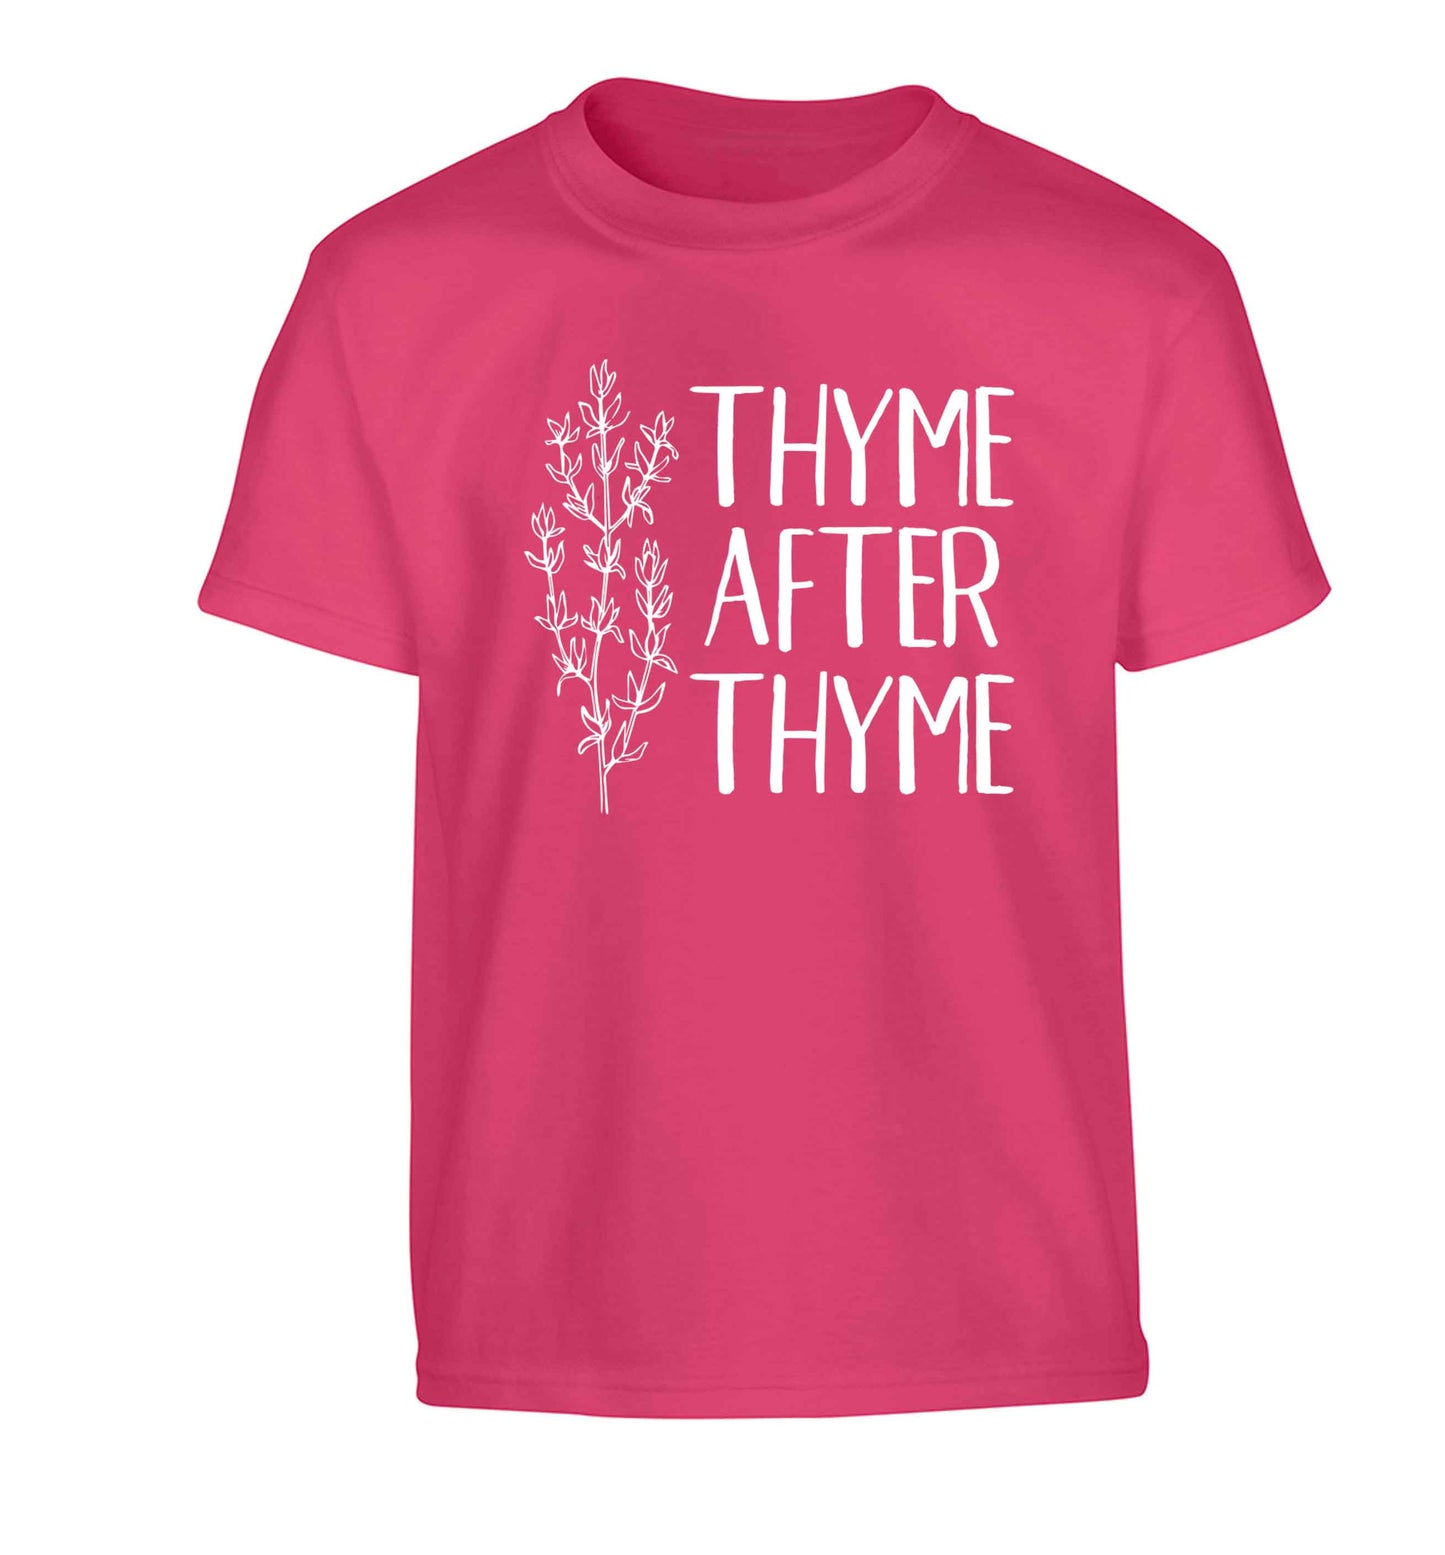 Thyme after thyme Children's pink Tshirt 12-13 Years